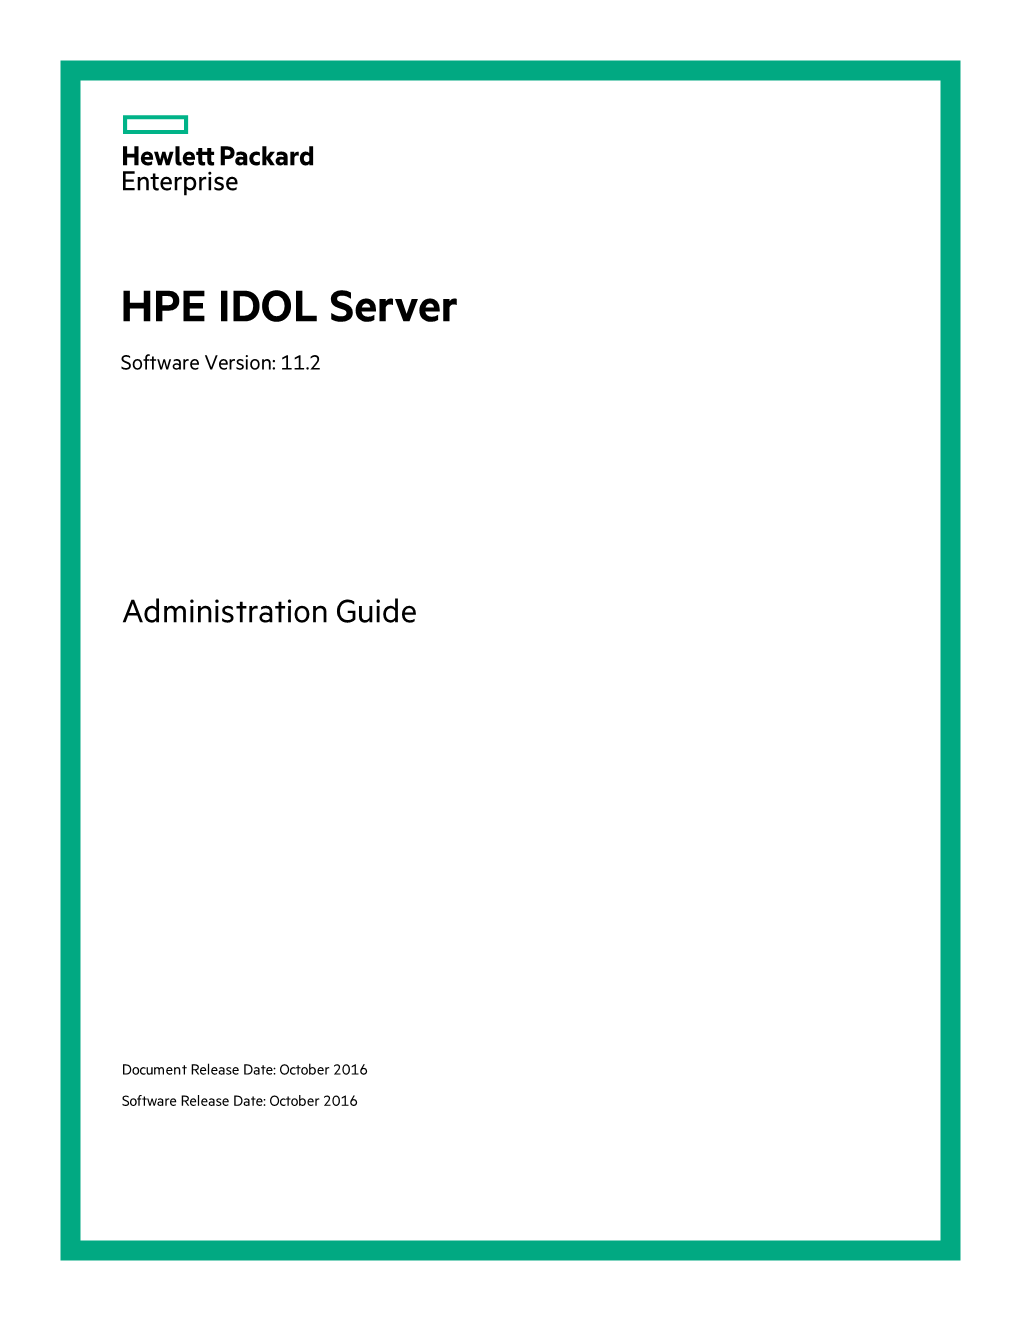 HPE IDOL Server 11.2 Administration Guide